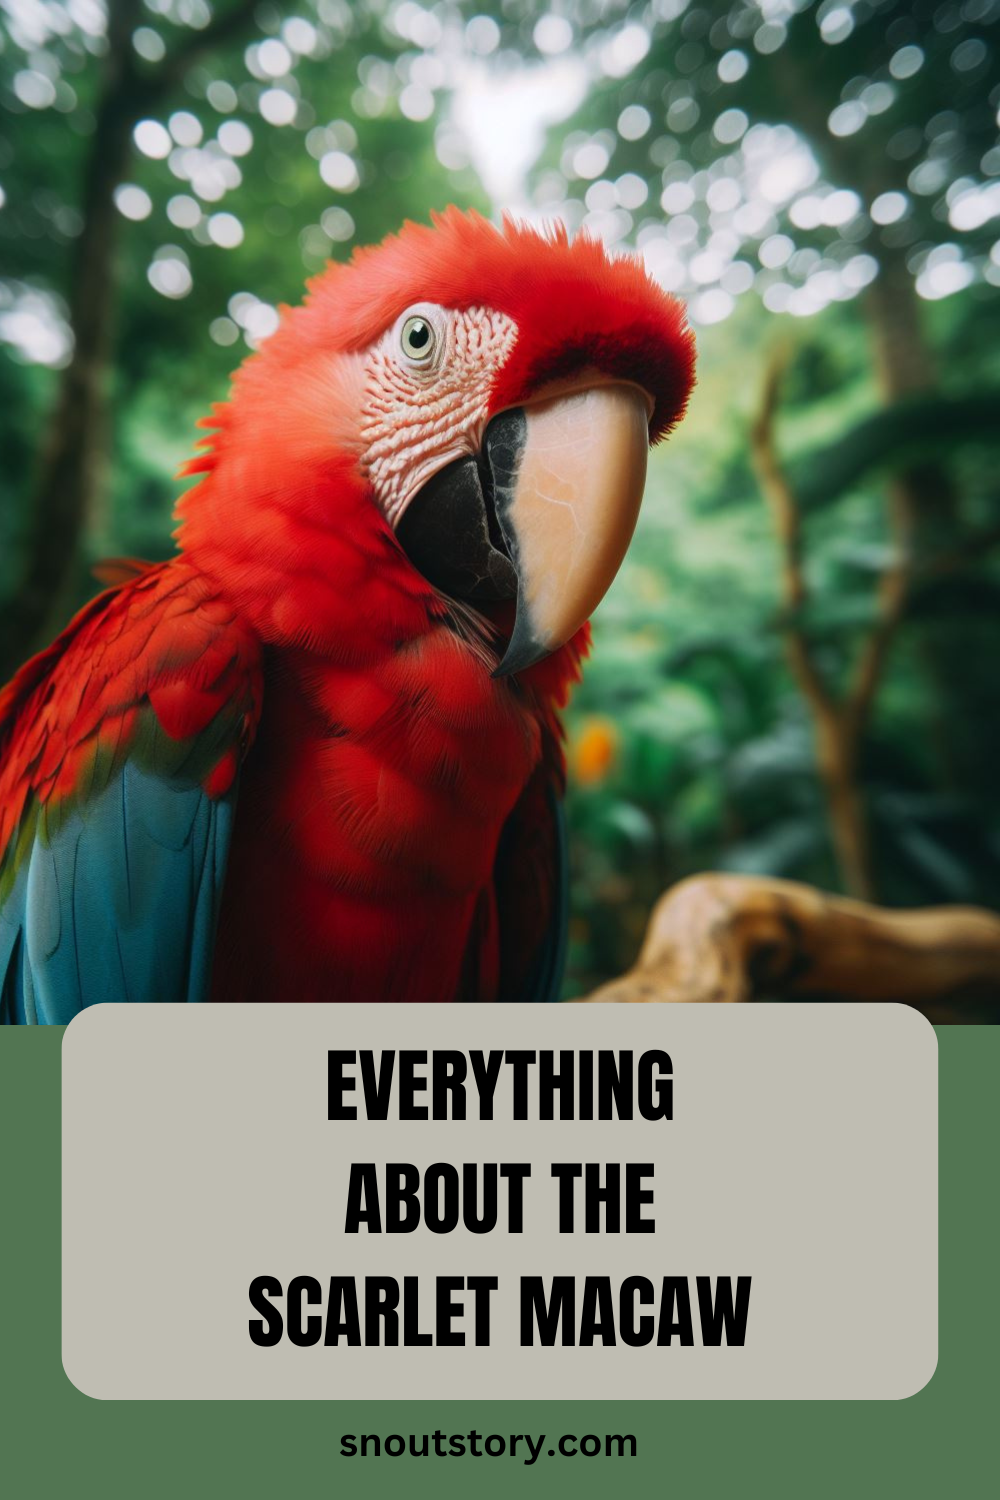 Everything About the Vibrant Scarlet Macaw